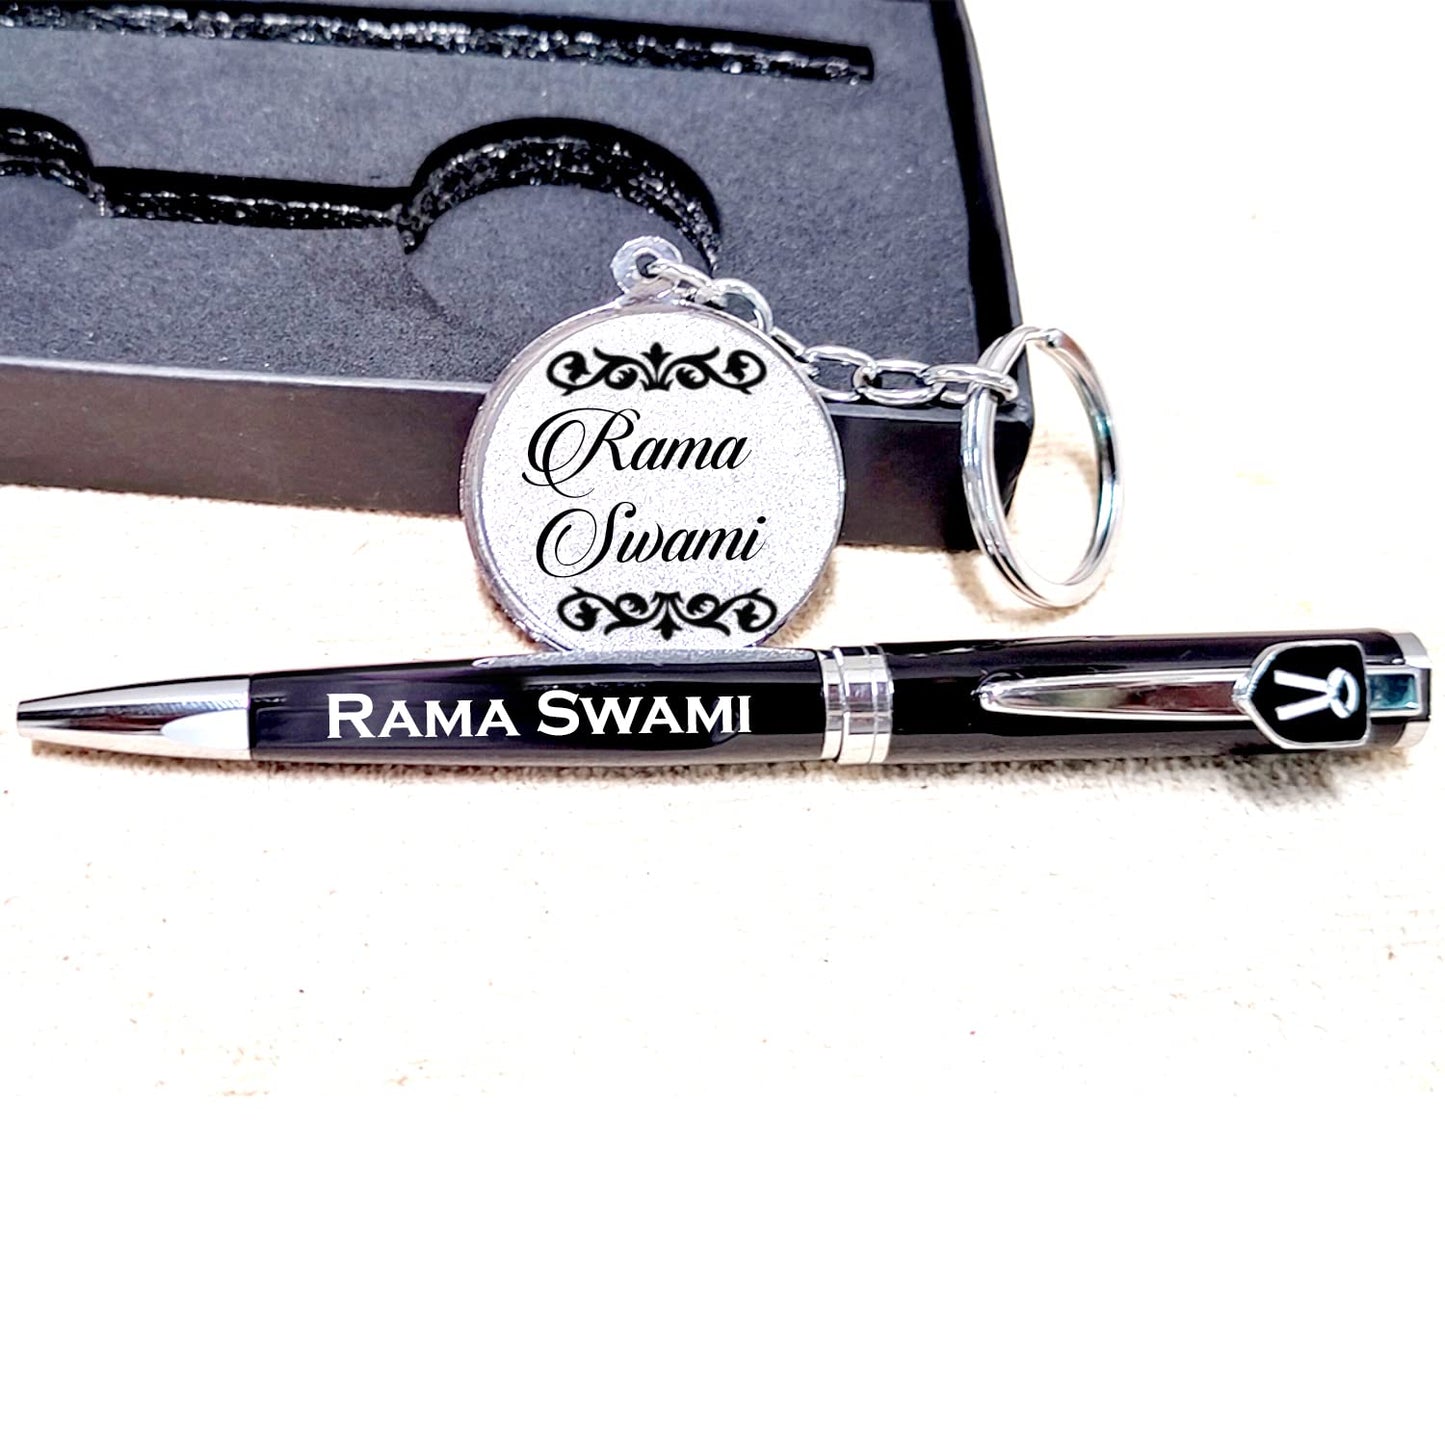 Sensygifts Advocate / Ca / Doctor Personalized Matt Black Ball Pen&Keychain With Your Name Engraved For All